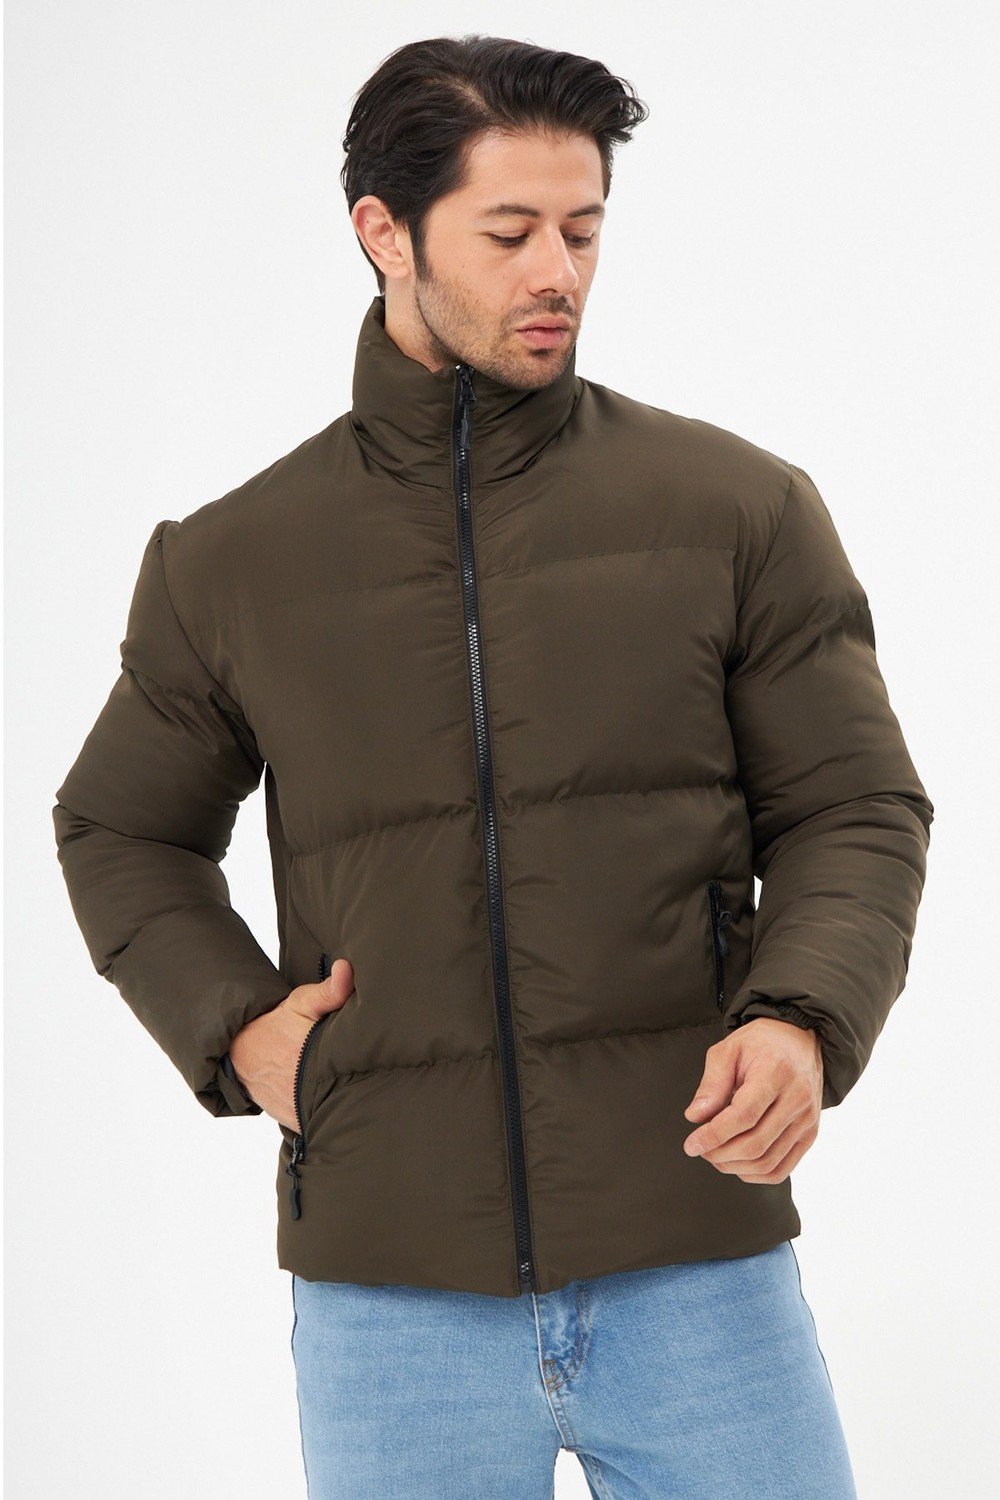 D1fference Men's Khaki Inflatable Winter Coat With Inflator Lined, Water And Windproof.